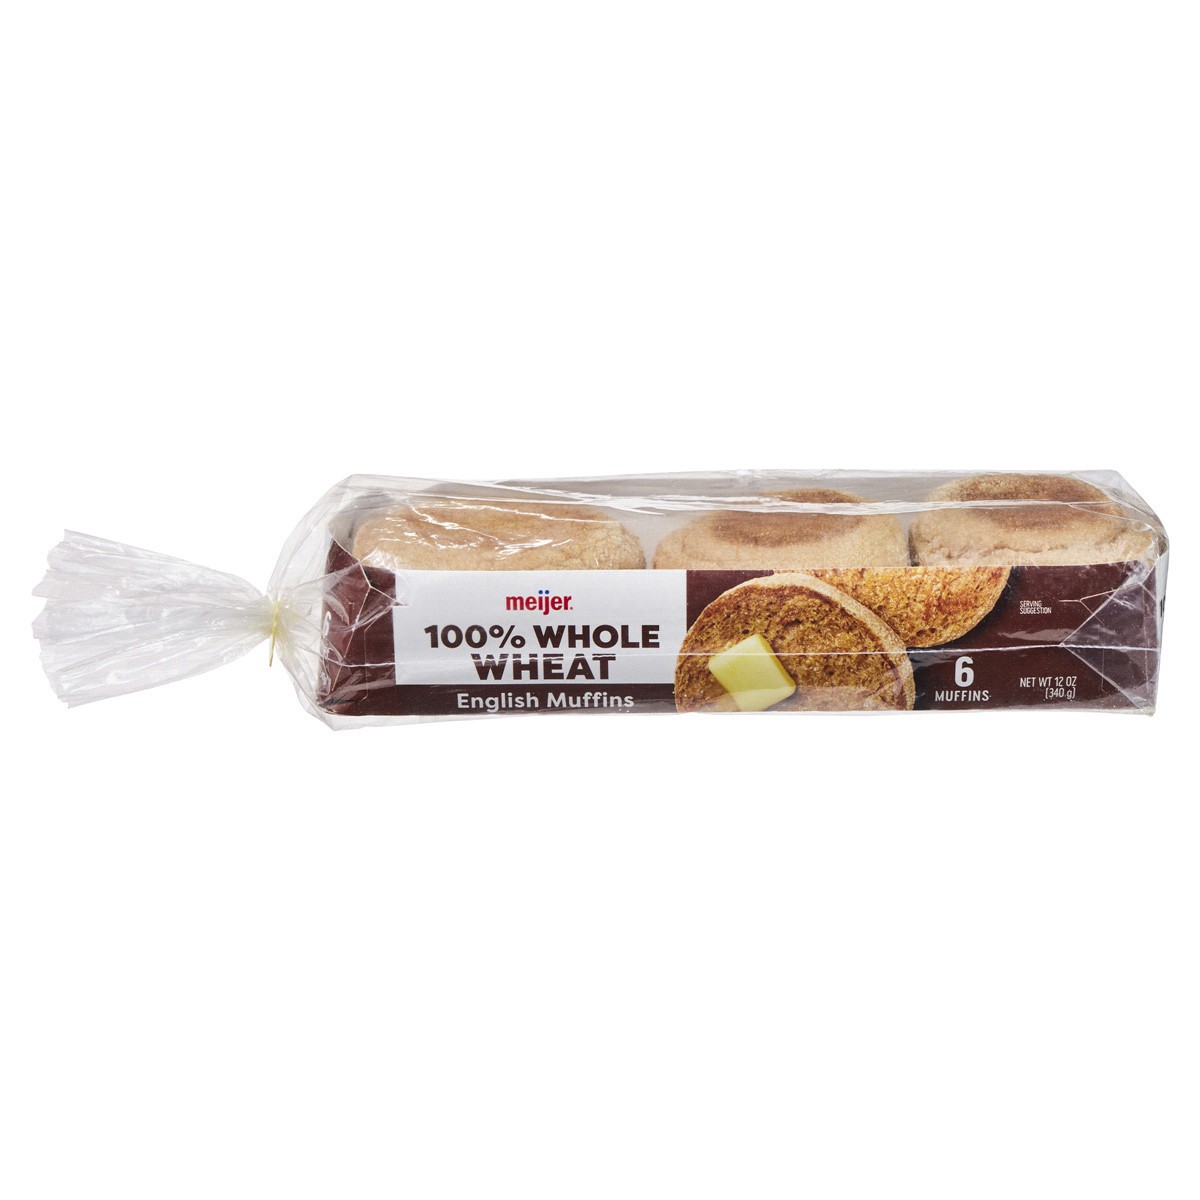 slide 1 of 13, Meijer 100% Whole Wheat English Muffins, 6 ct